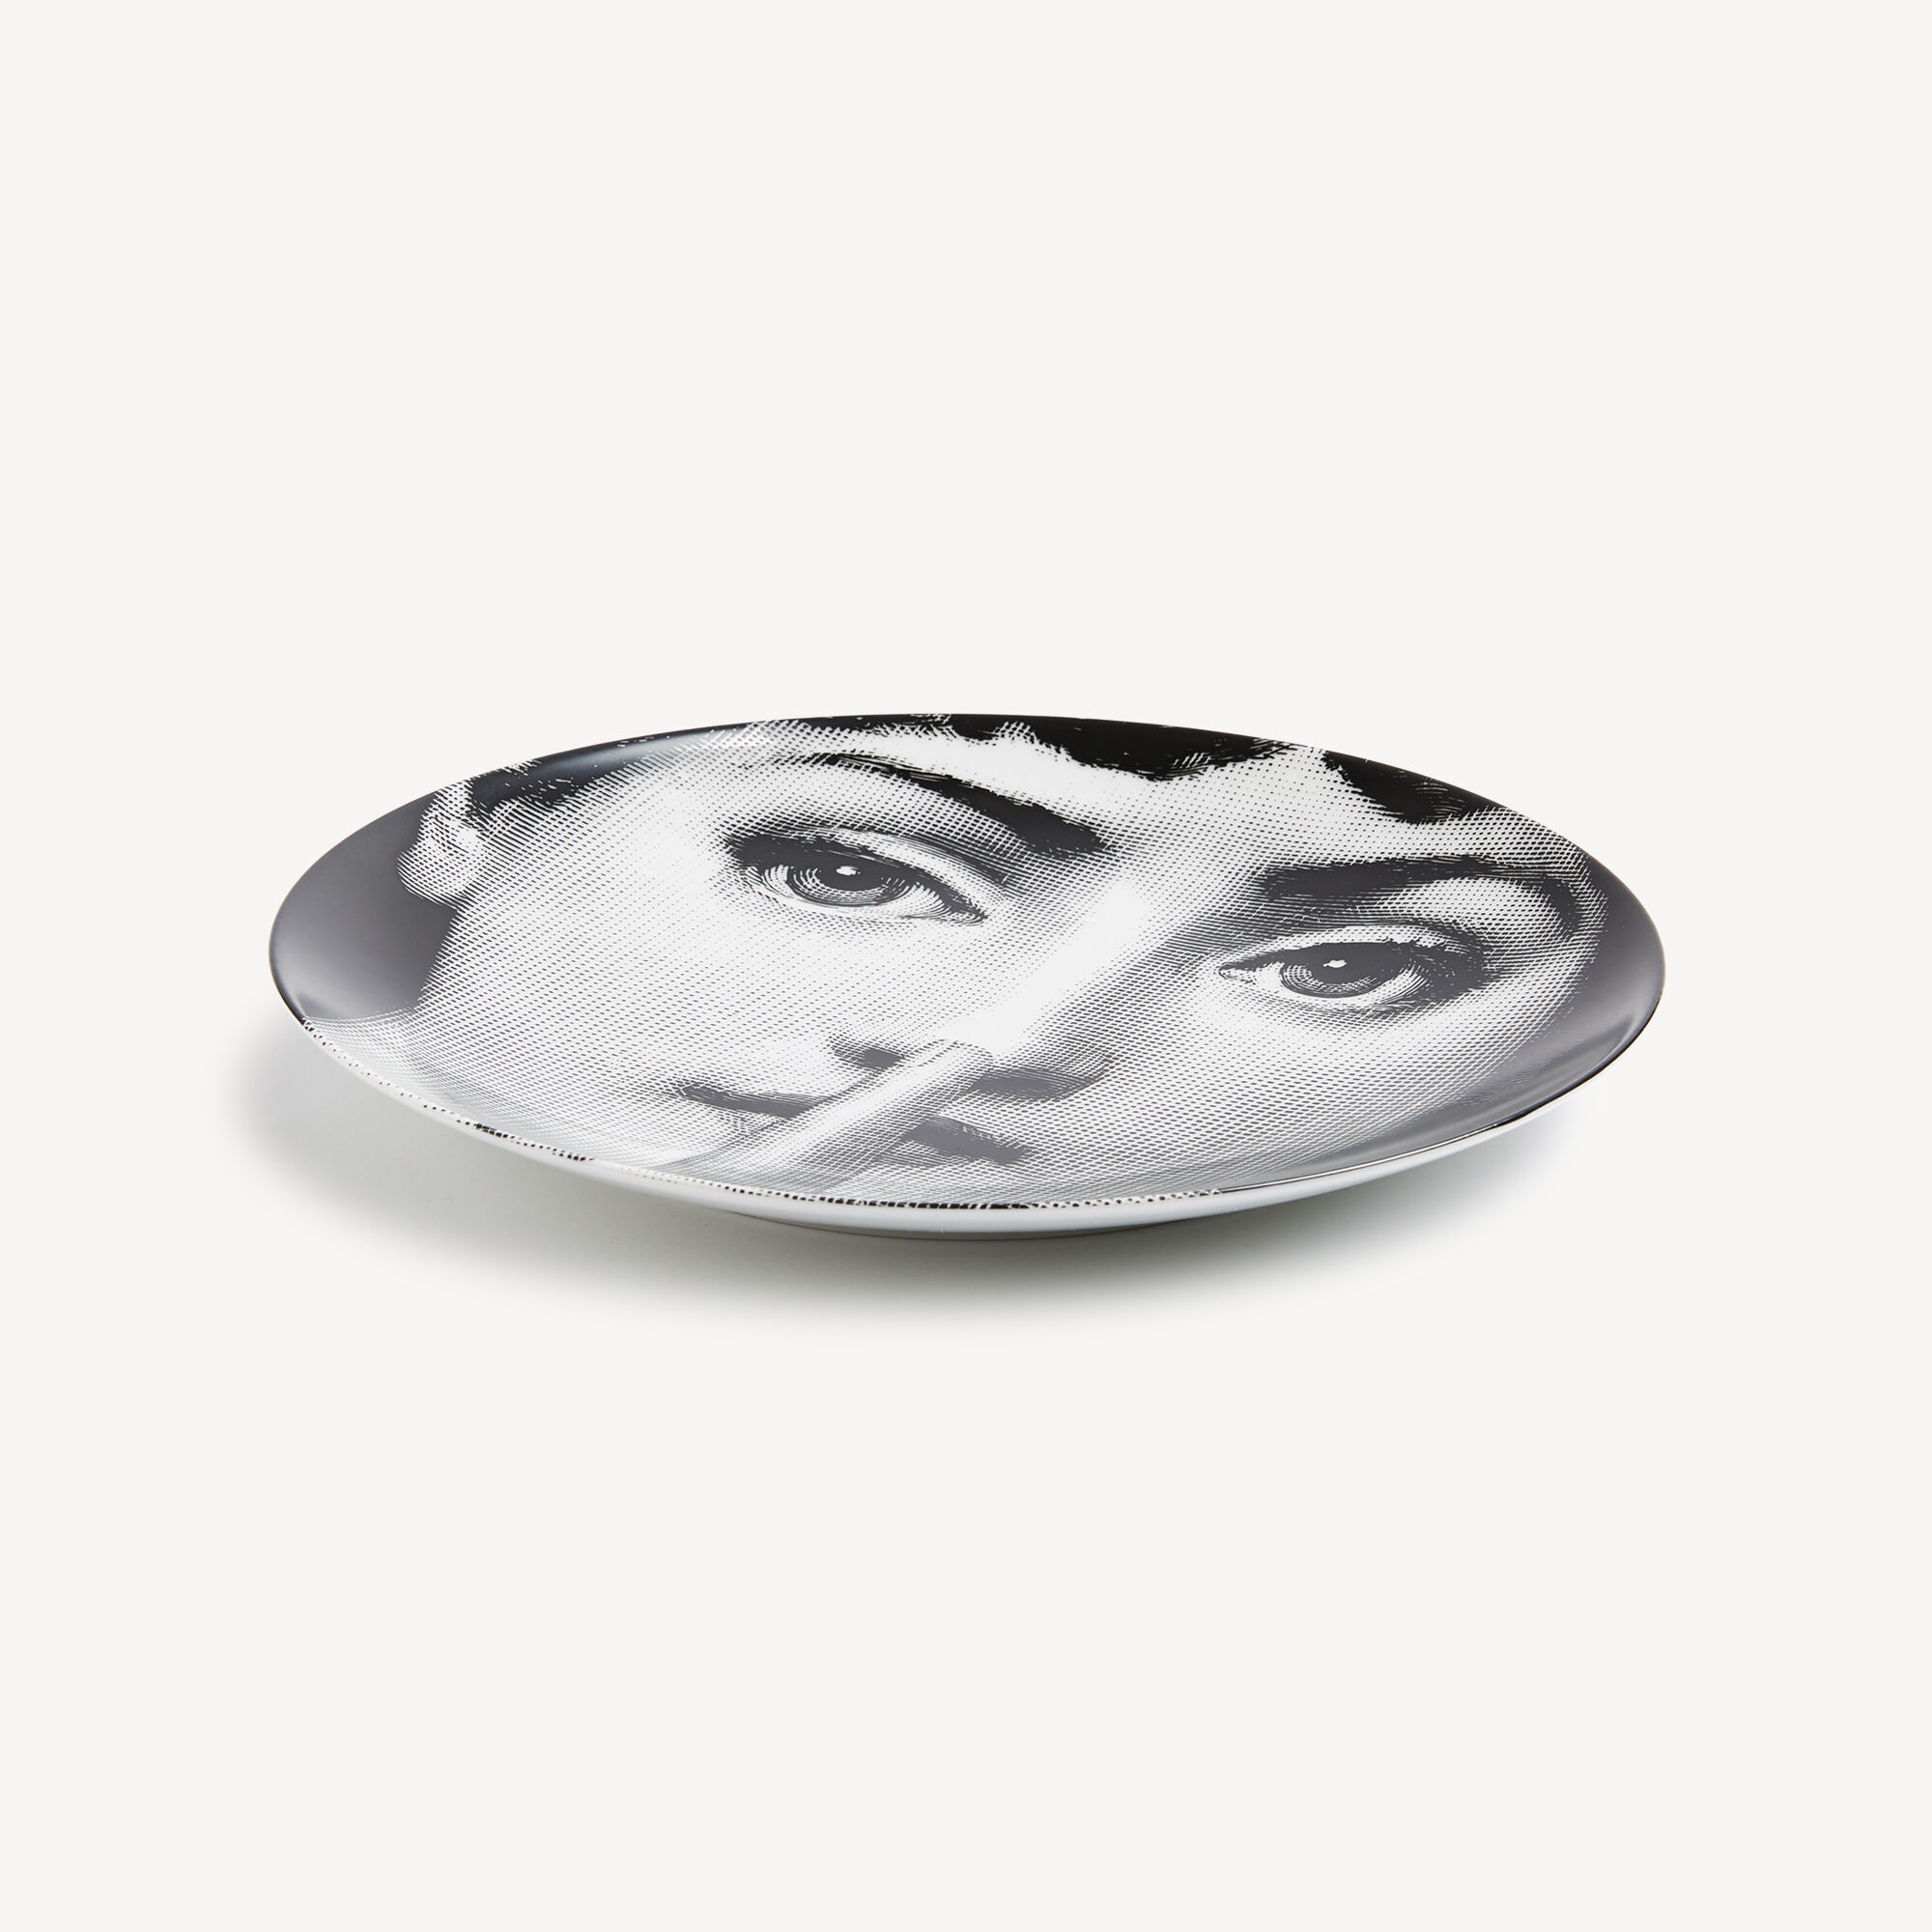 Fornasetti portrait and bow print plate - Black